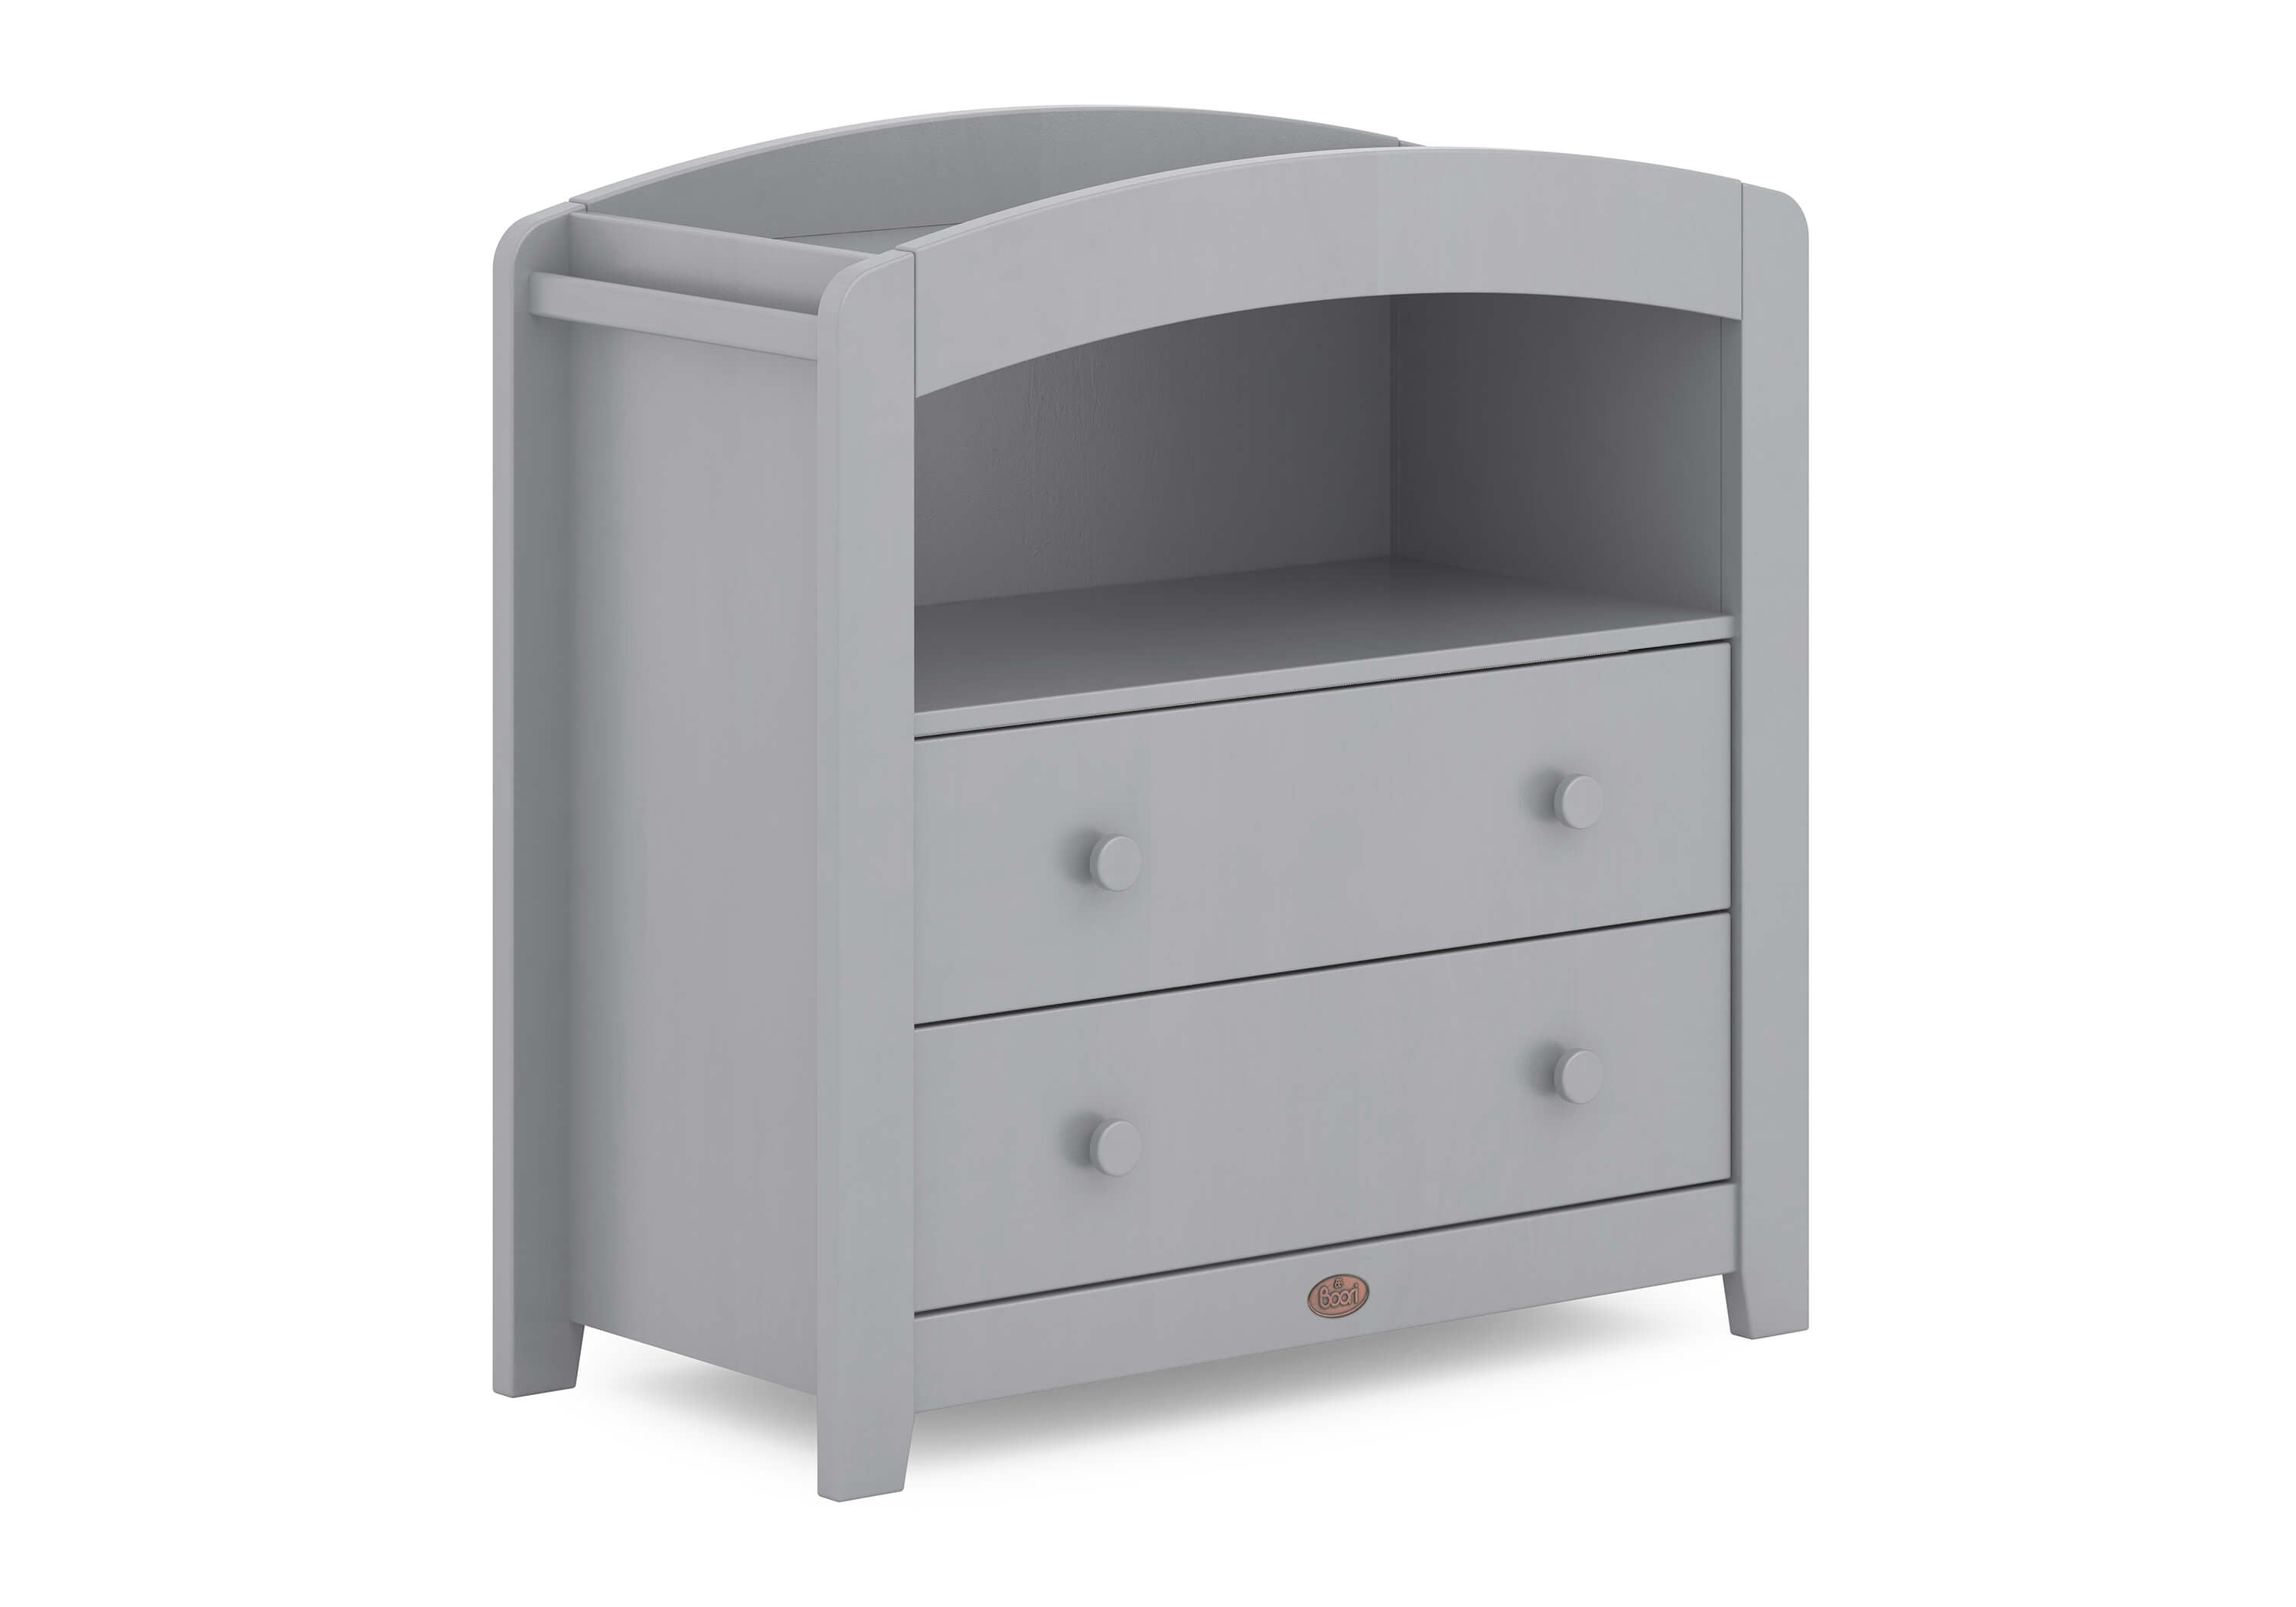 Boori Curved 2 Drawer Chest Changer - Pebble